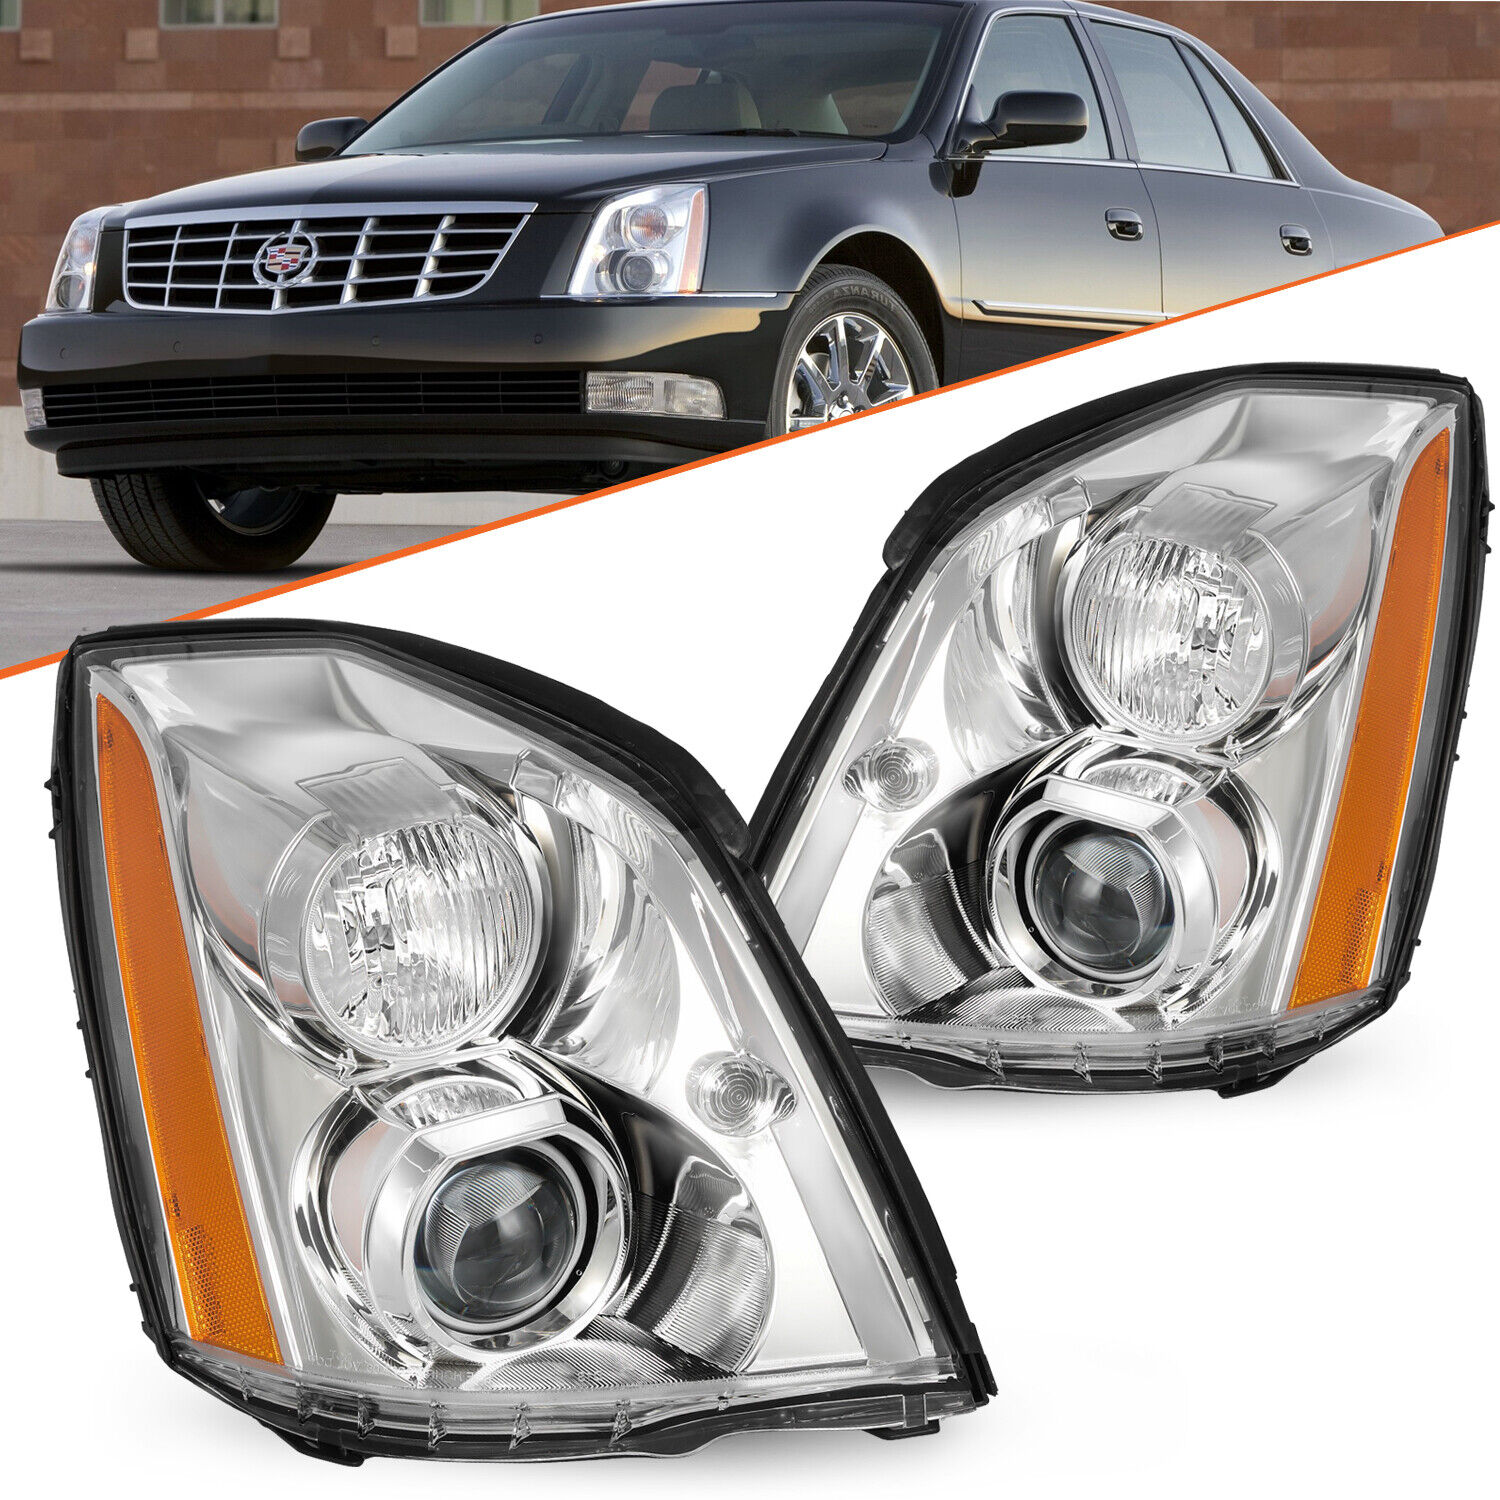 HID/Xenon OE Style Projector Headlight For 2006-2011 Cadillac DTS Left+Right